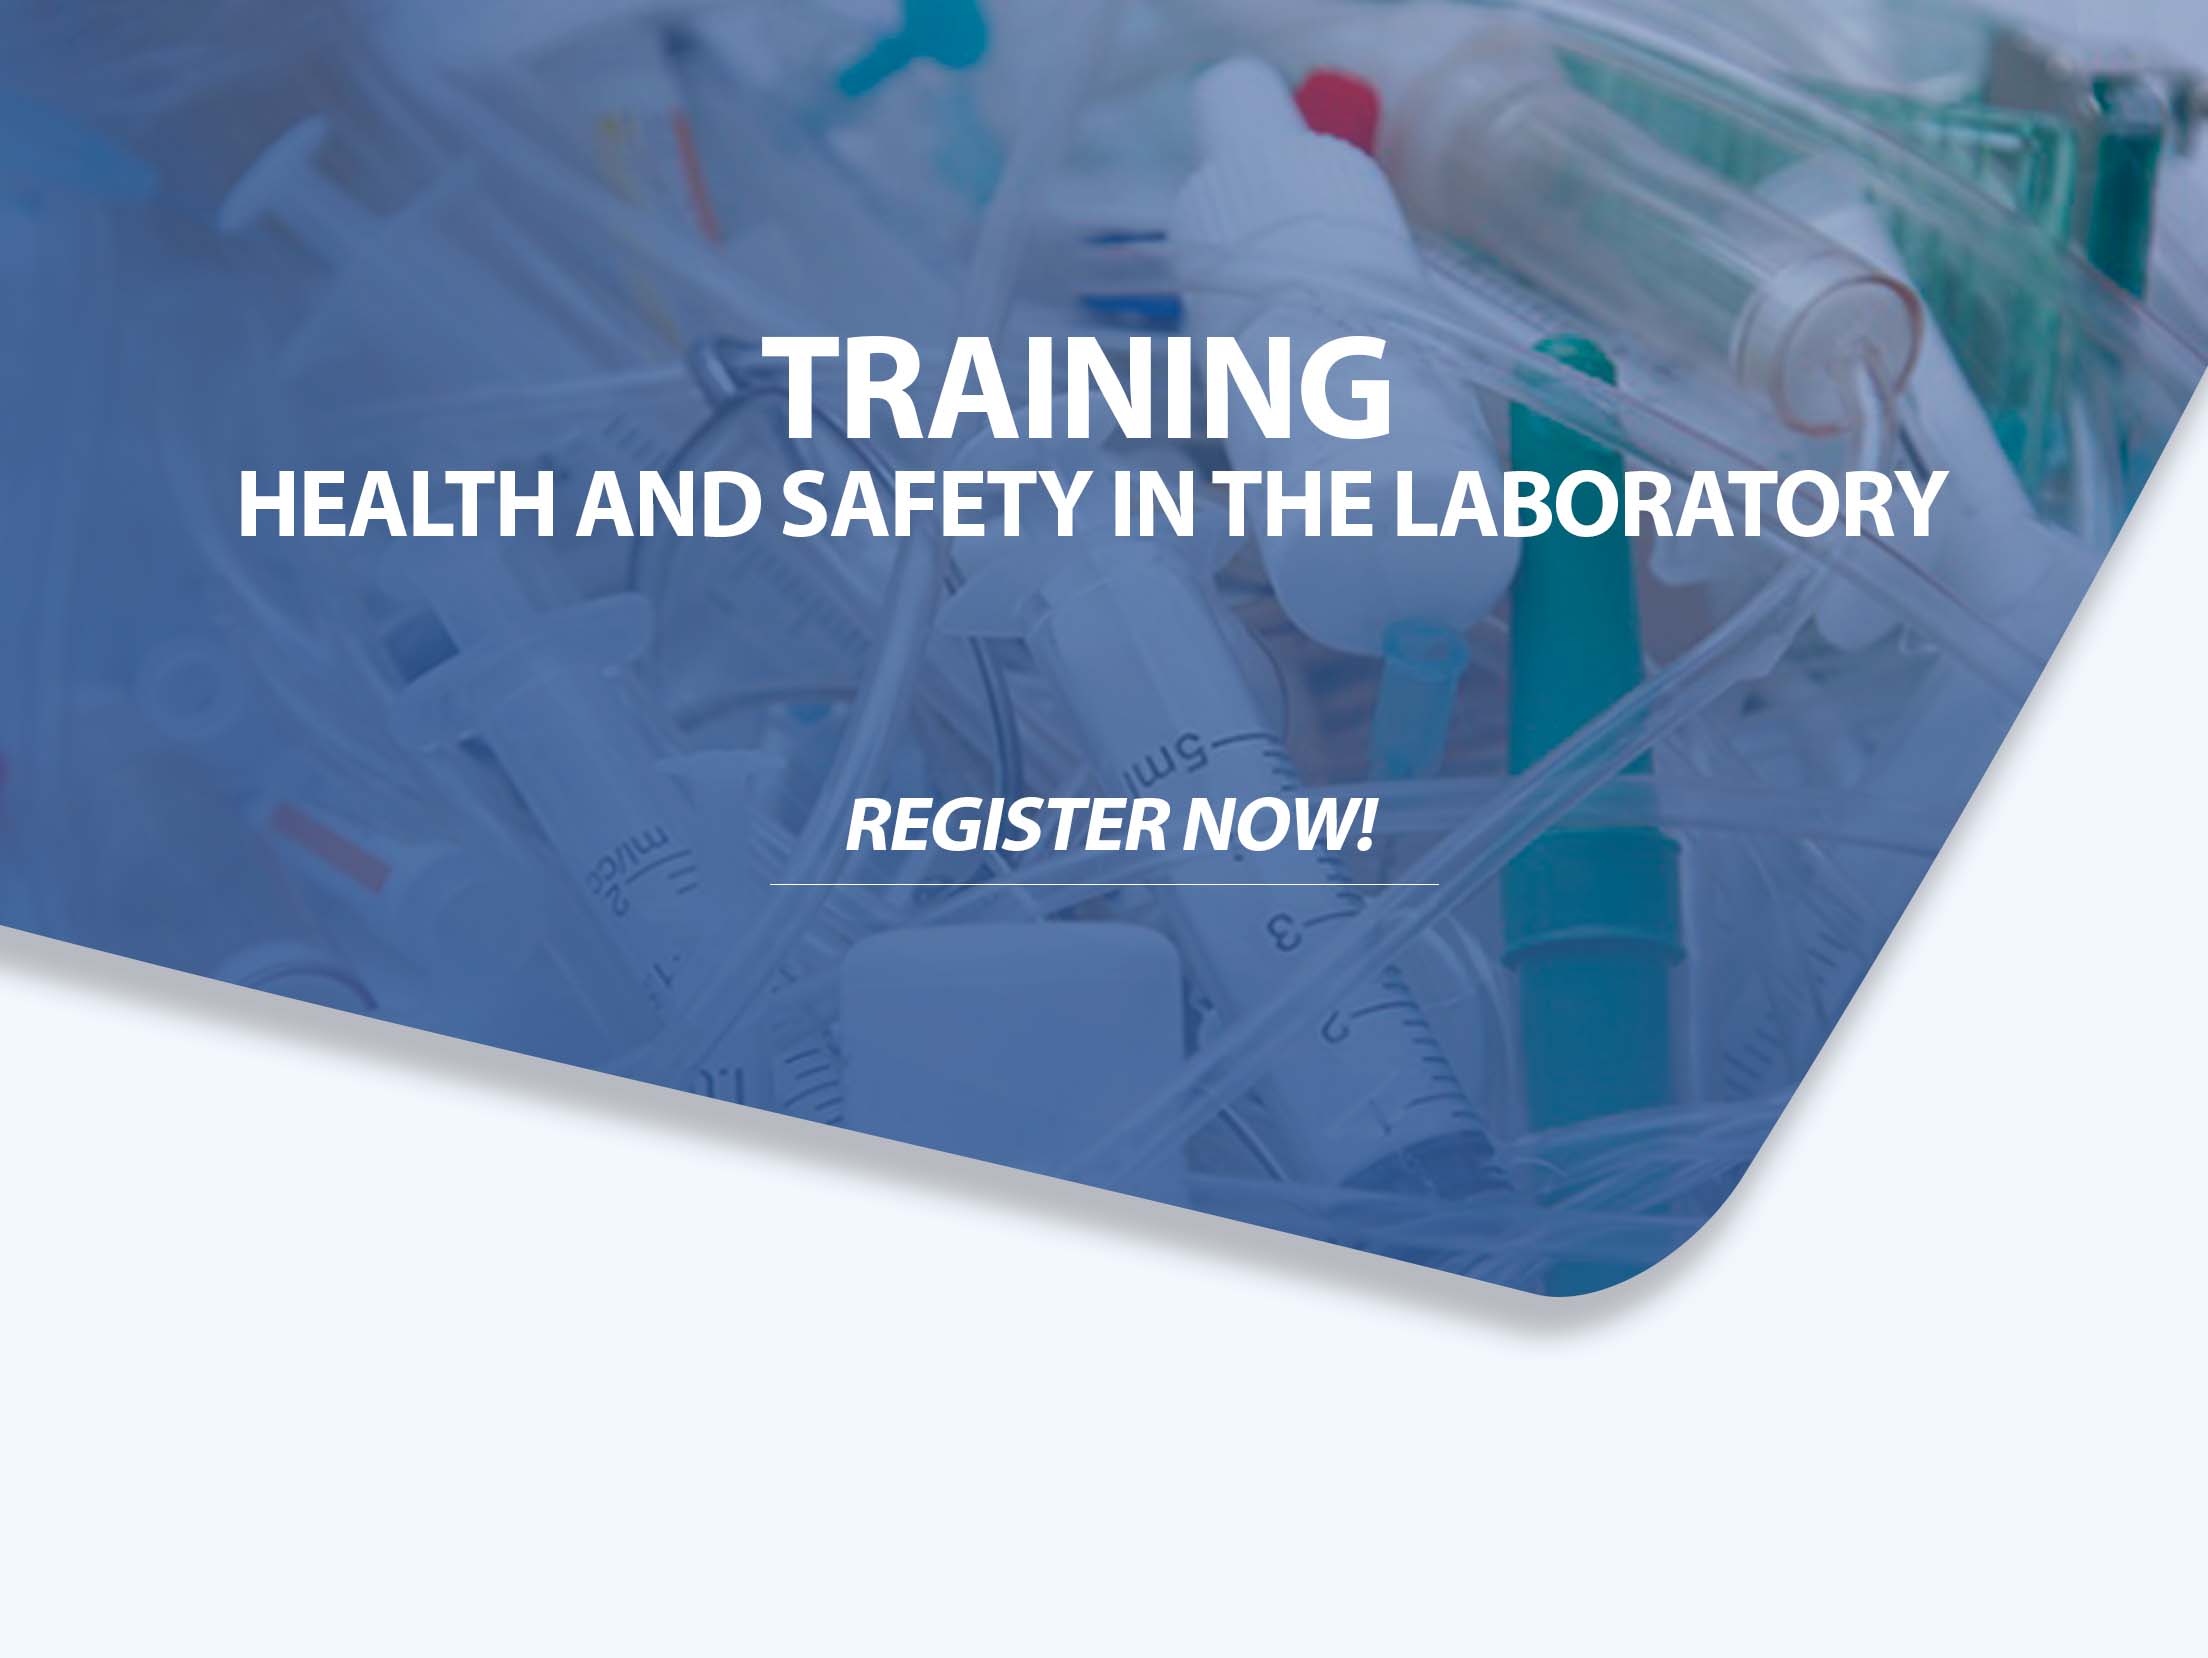 HEALTH AND SAFETY IN THE LABORATORY